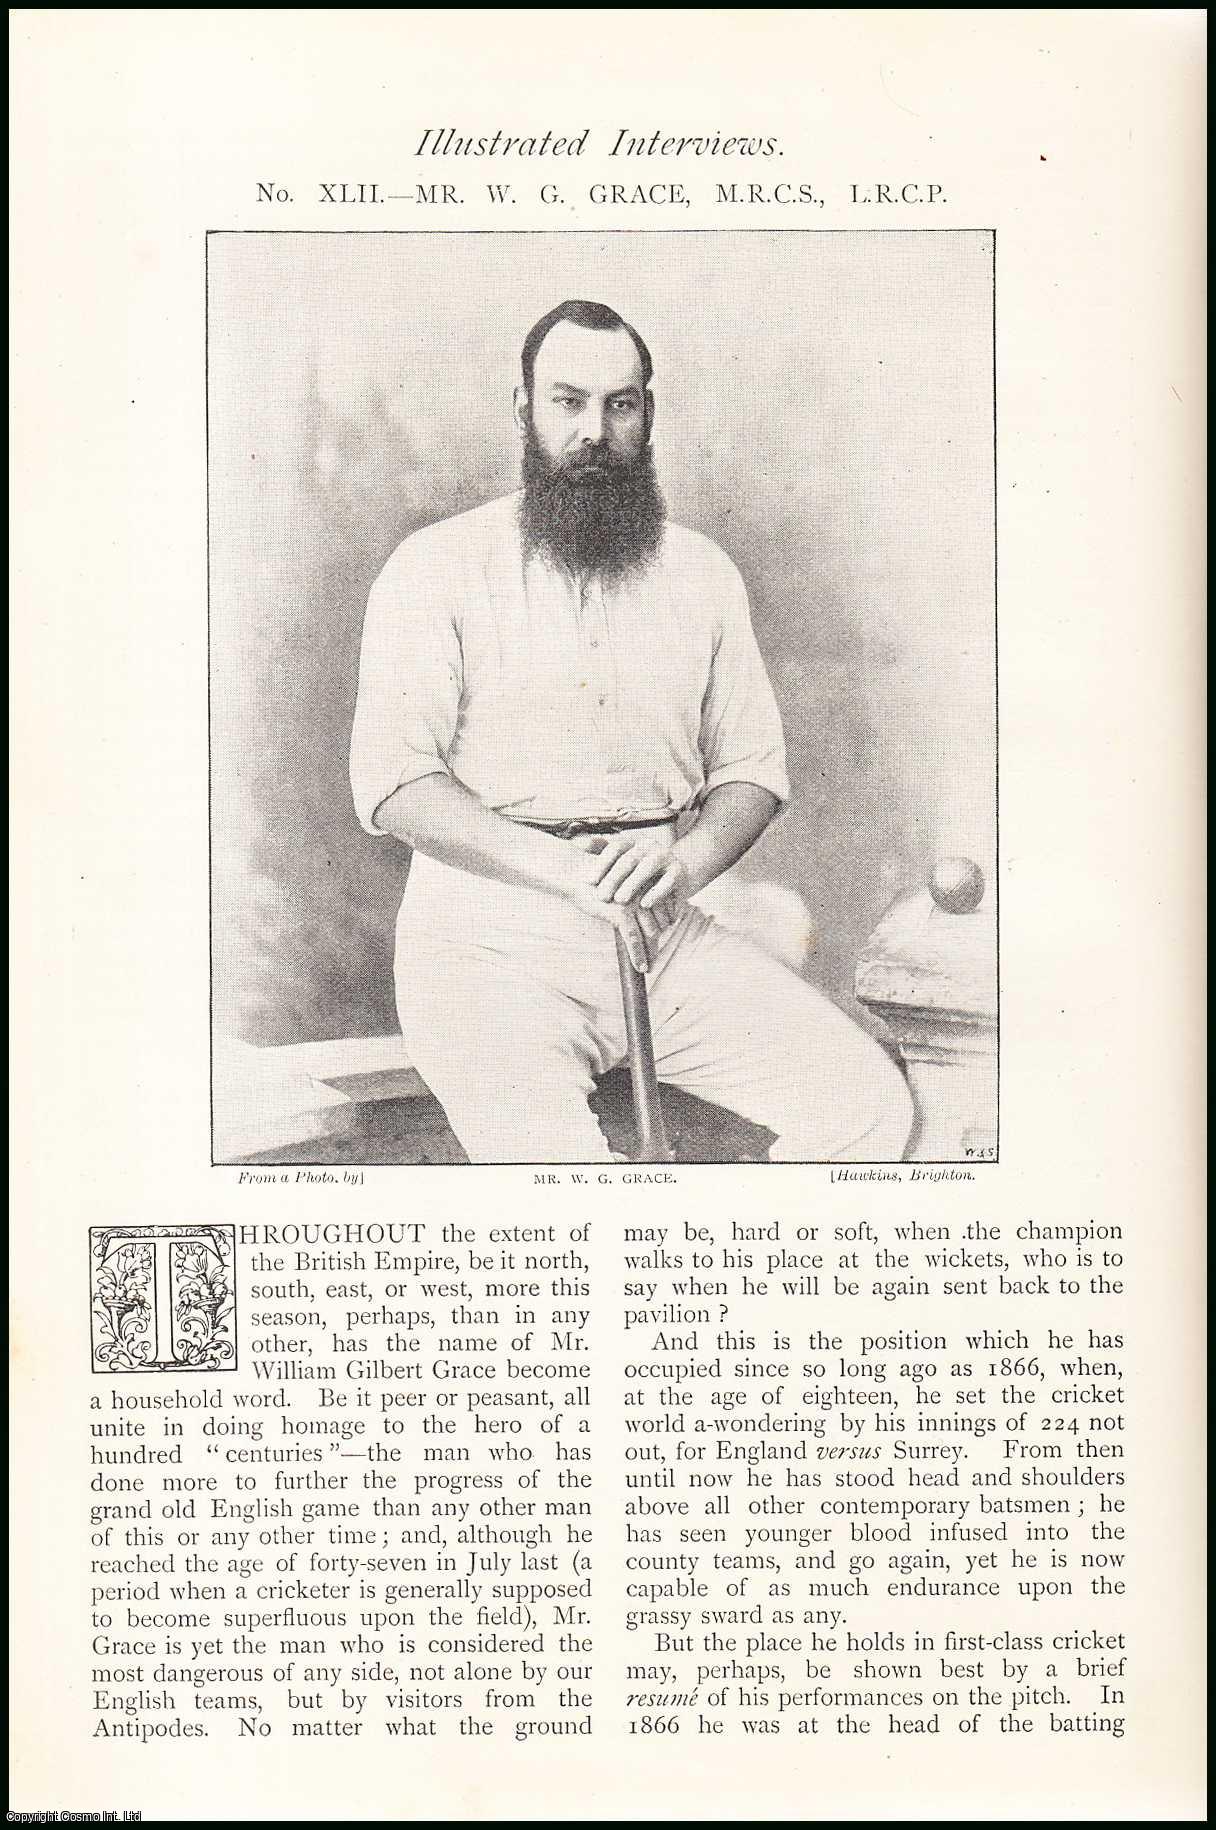 Unstated - Mr. William Gilert Grace, Cricketer. Illustrated Interview. An uncommon original article from The Strand Magazine, 1895.